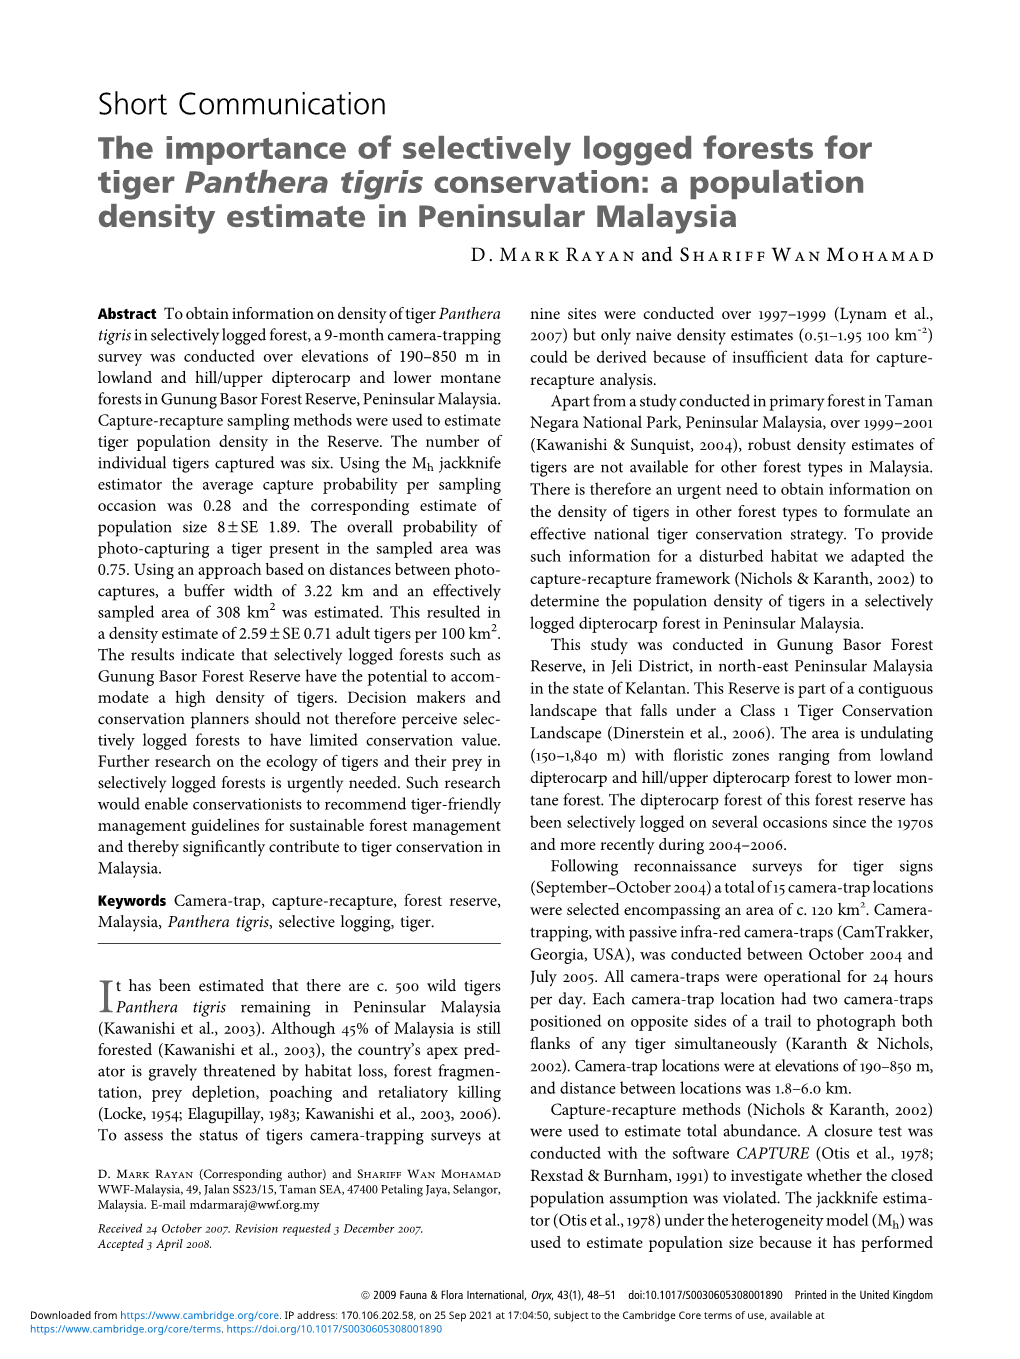 The Importance of Selectively Logged Forests for Tiger Panthera Tigris Conservation: a Population Density Estimate in Peninsular Malaysia D